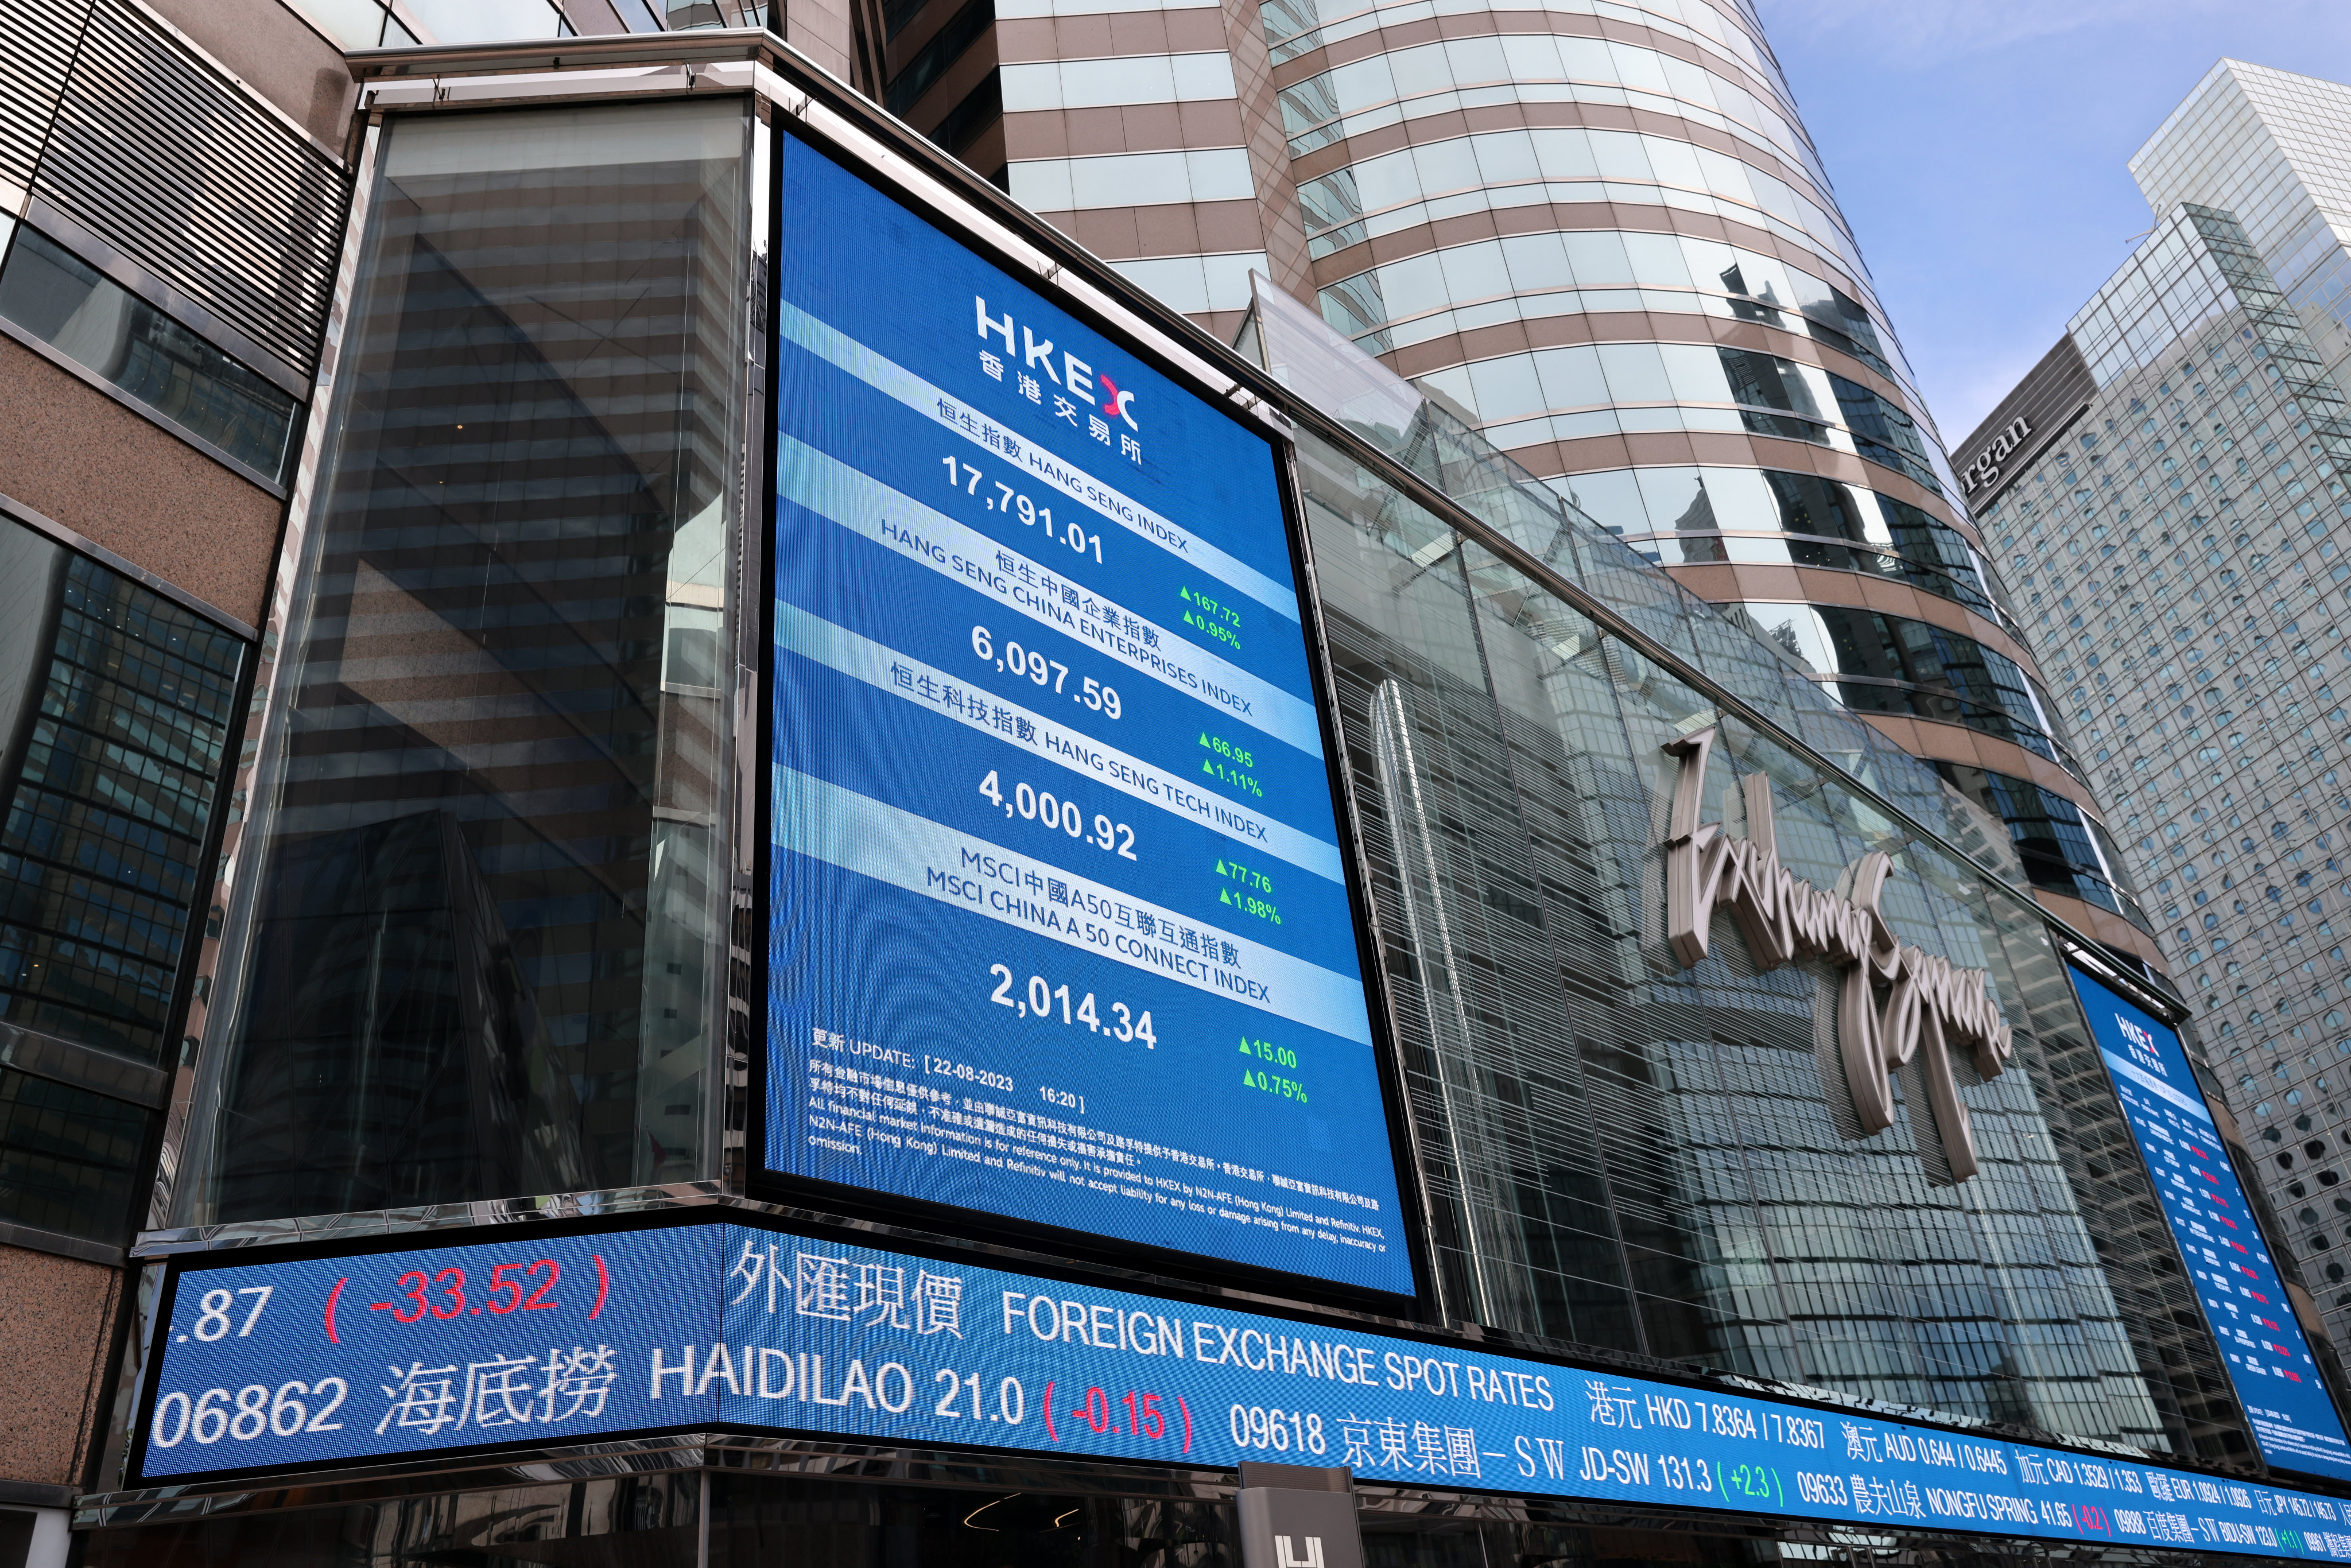 Hong Kong should follow mainland China’s lead in cutting the stamp duty payable when shares change hands to boost low market turnover, say brokers and analysts. Photo: Yik Yeung-man